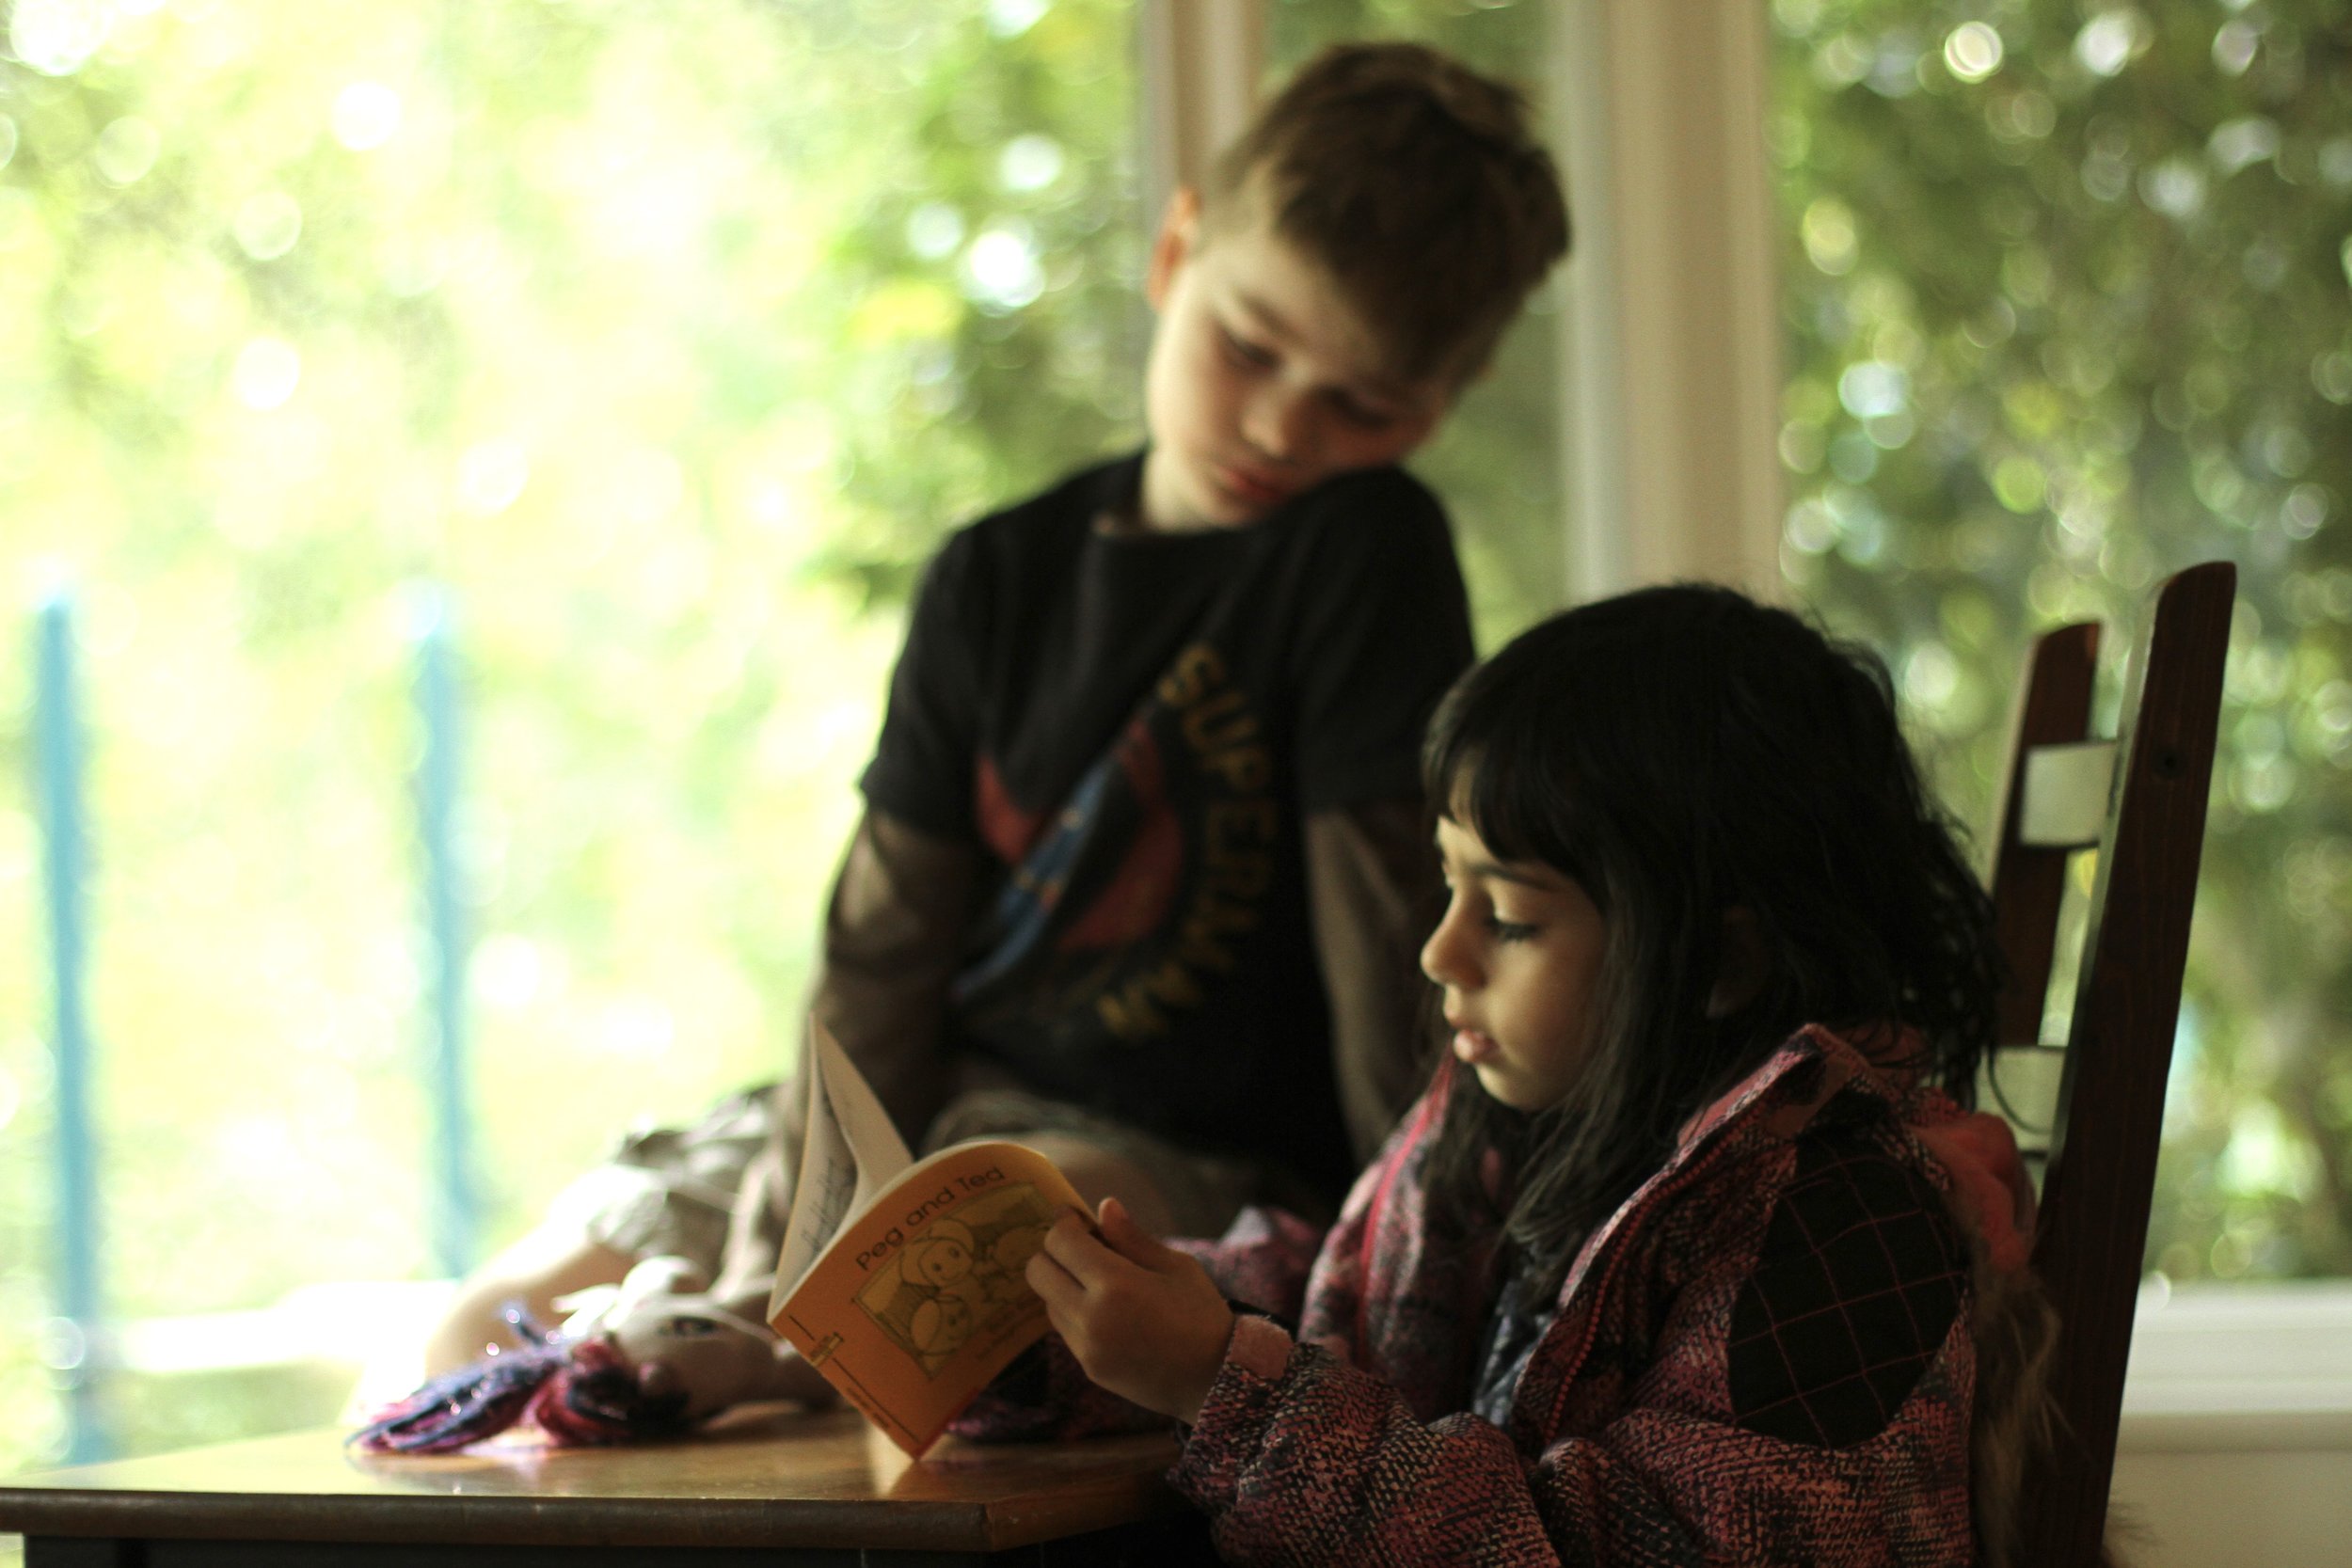 Two young students reading a book together.